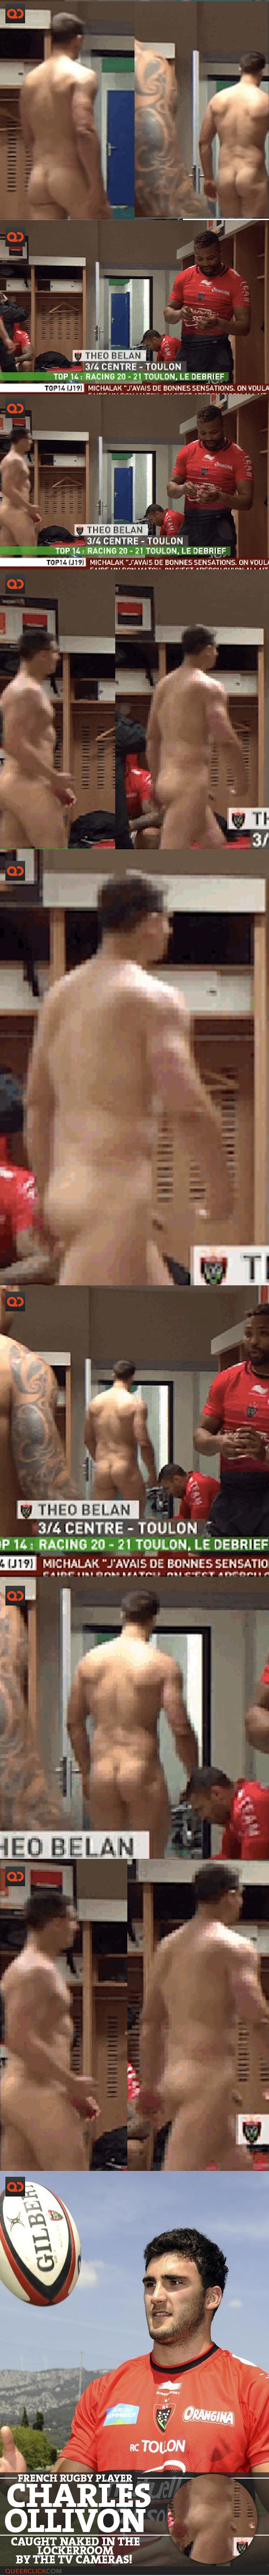 French Rugby Player Charles Ollivon Caught Naked In The Locker Room By The TV Cameras!